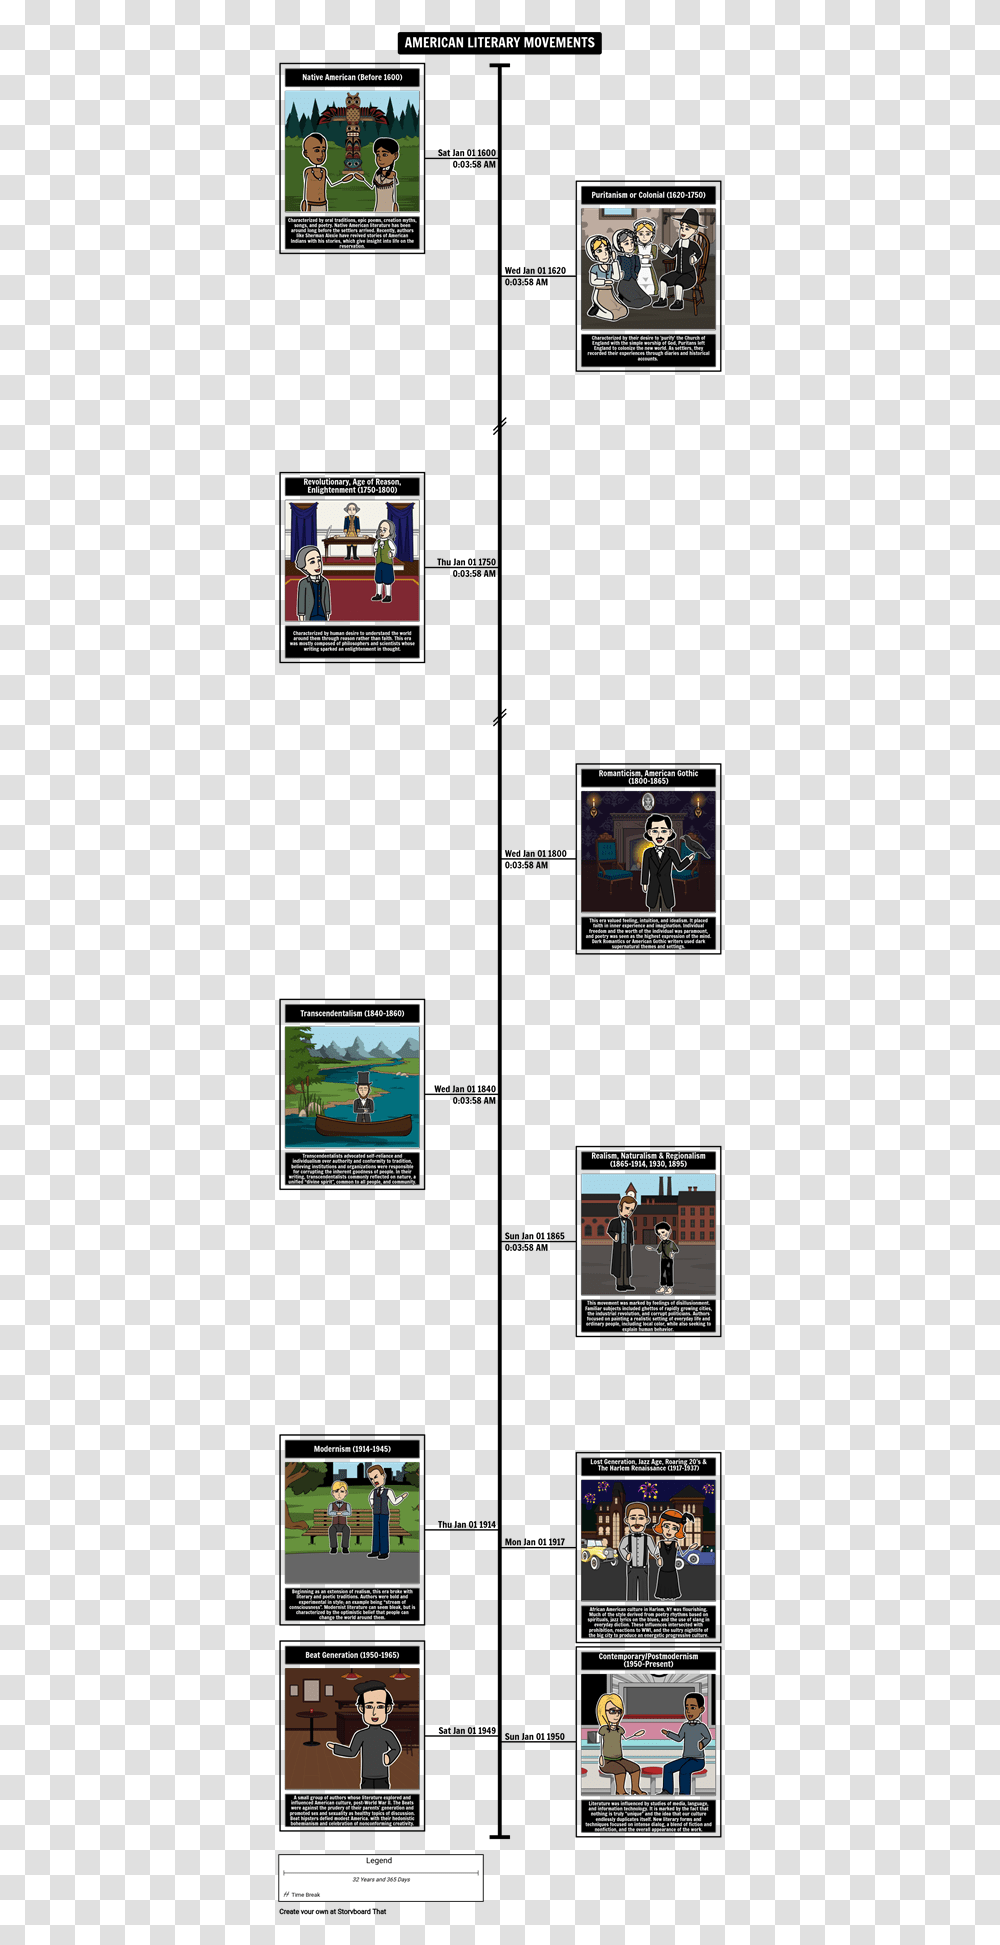 American Literary Movements Timeline American Literature Timeline, Person, Human, Legend Of Zelda, Overwatch Transparent Png